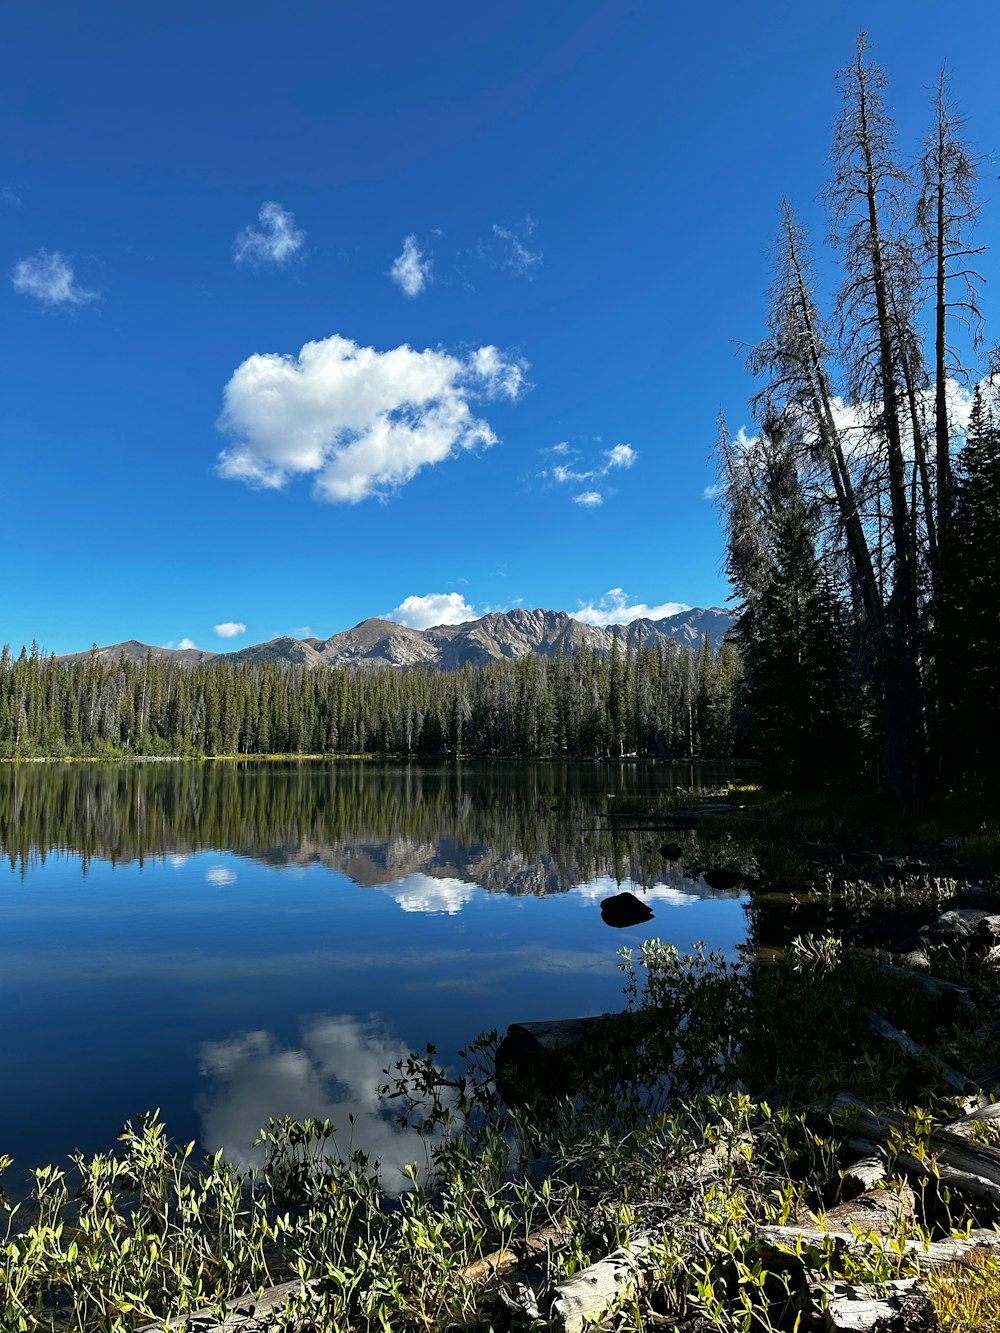 a lake surrounded by trees and mountains under a blue sky